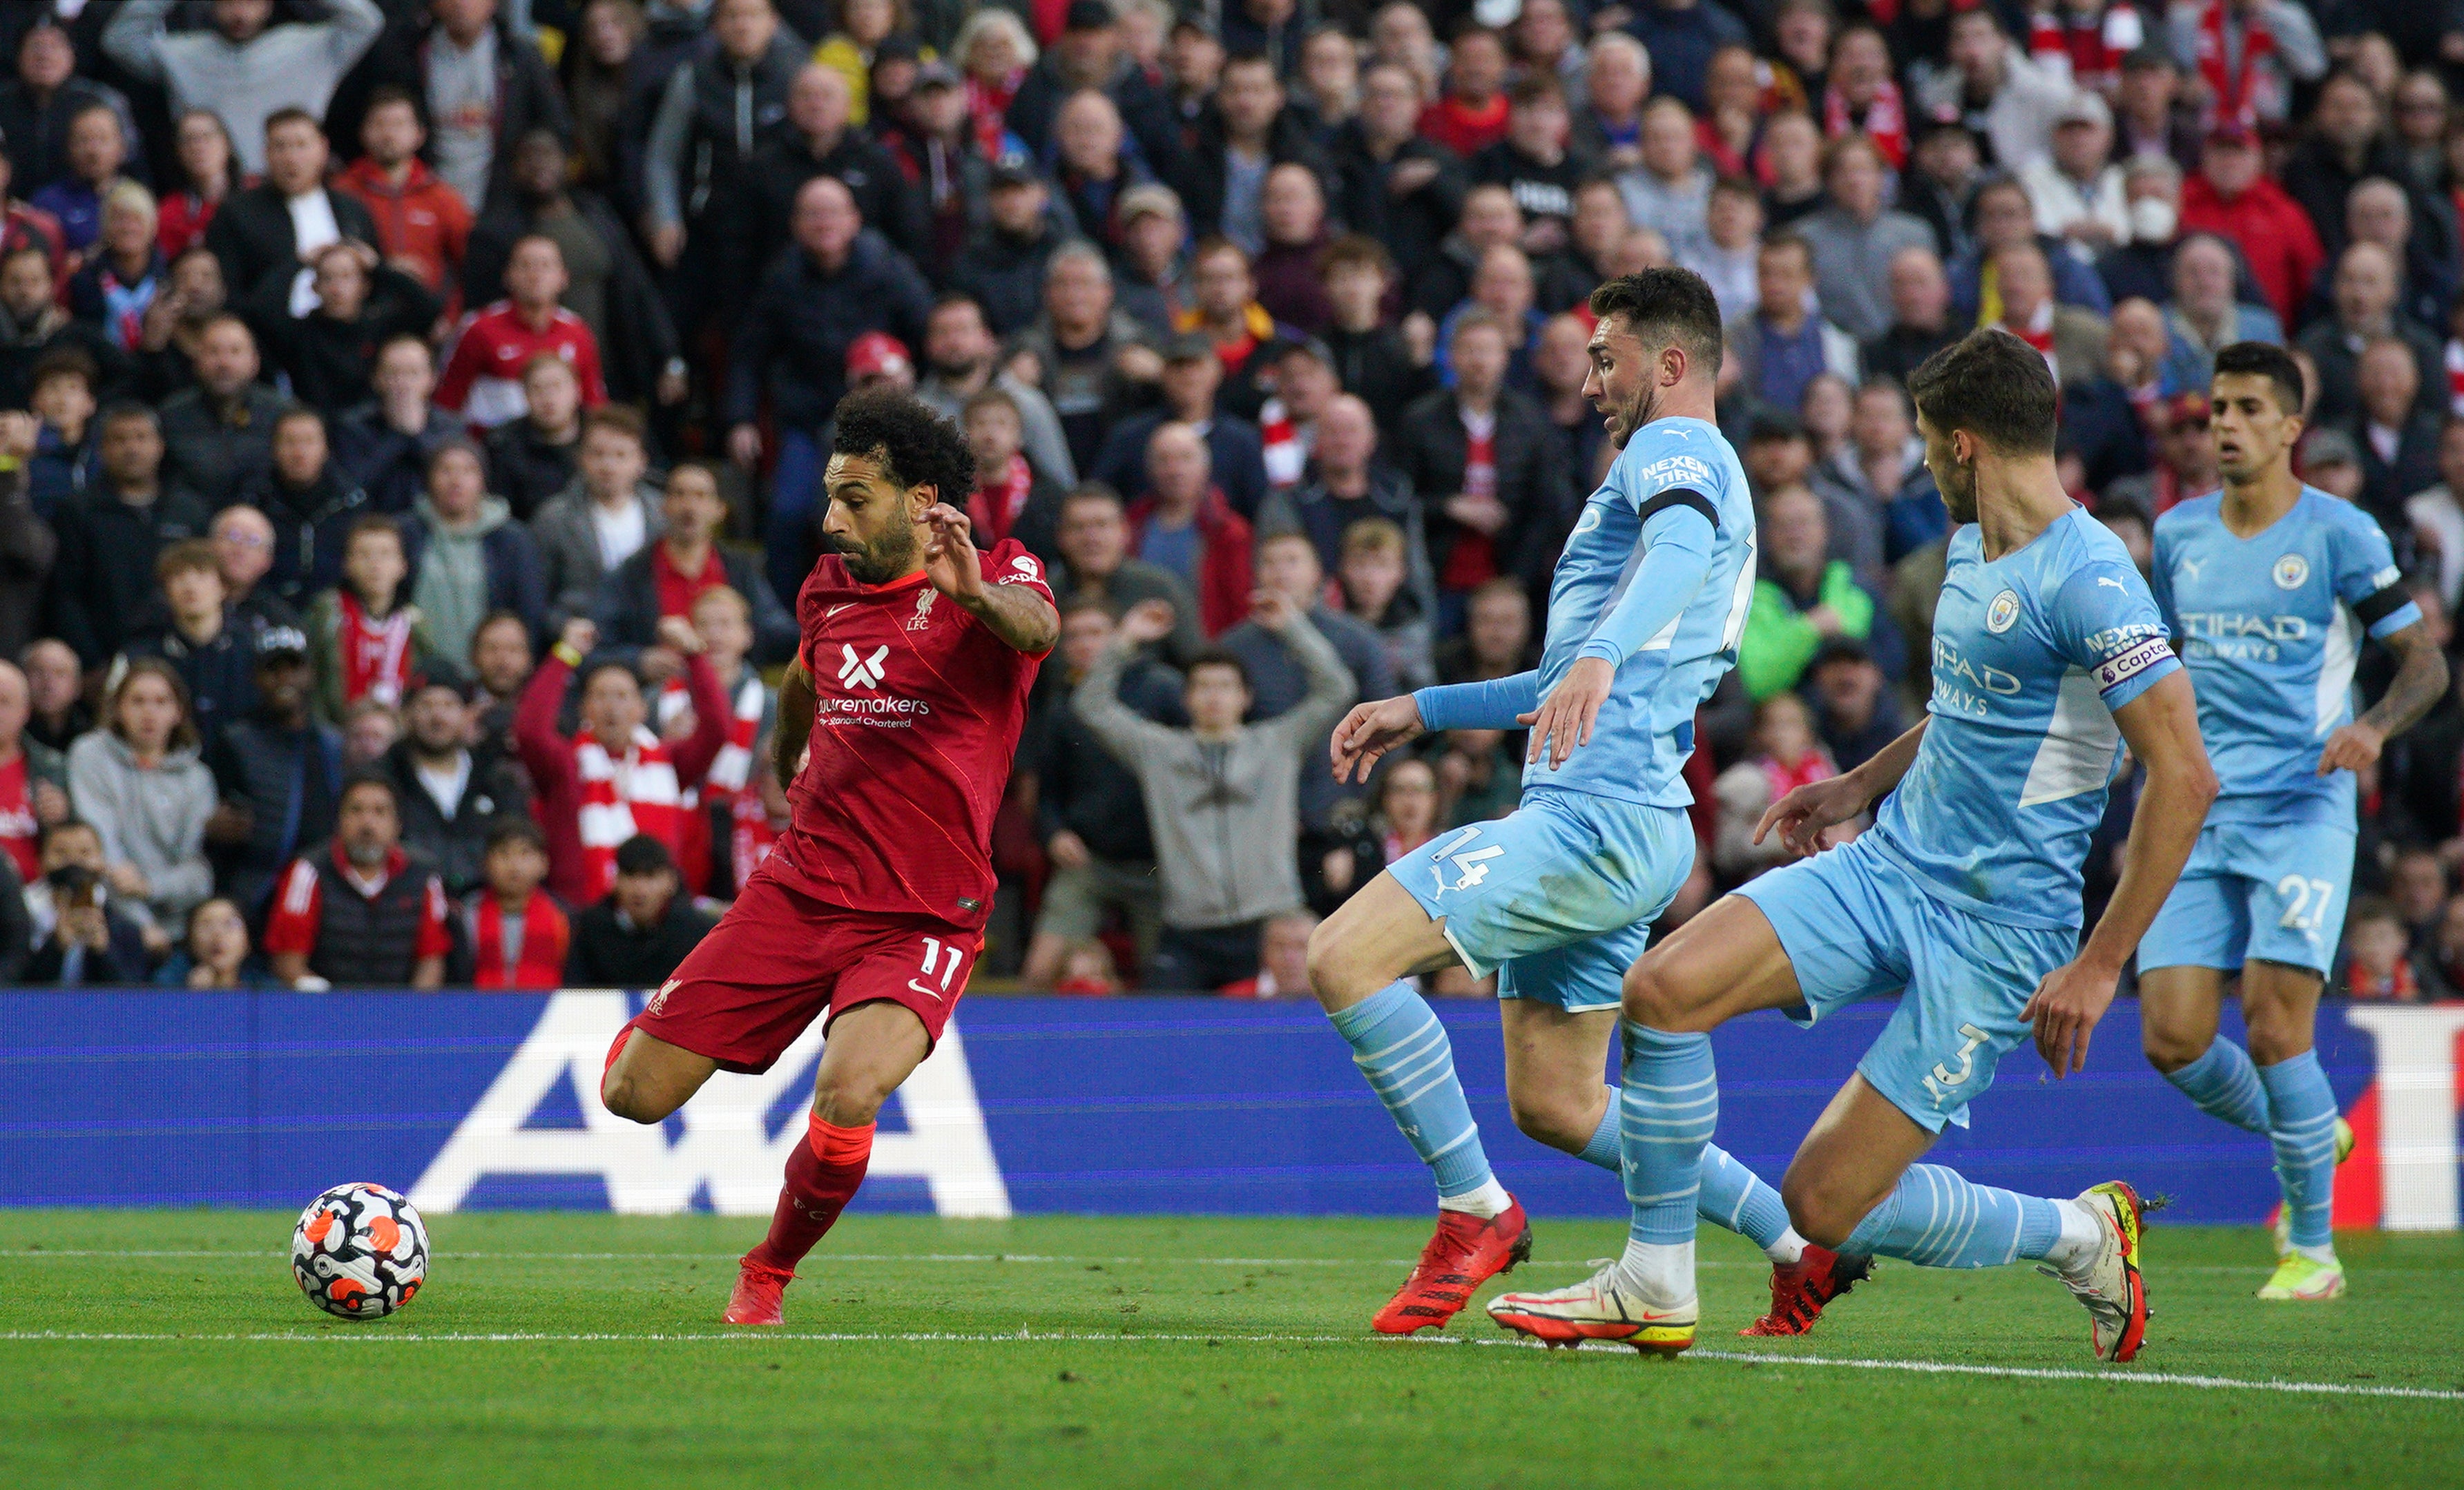 Liverpool’s Mohamed Salah scores their side’s second goal of the game during the Premier League match at Anfield, Liverpool. Picture date: Sunday October 3, 2021.